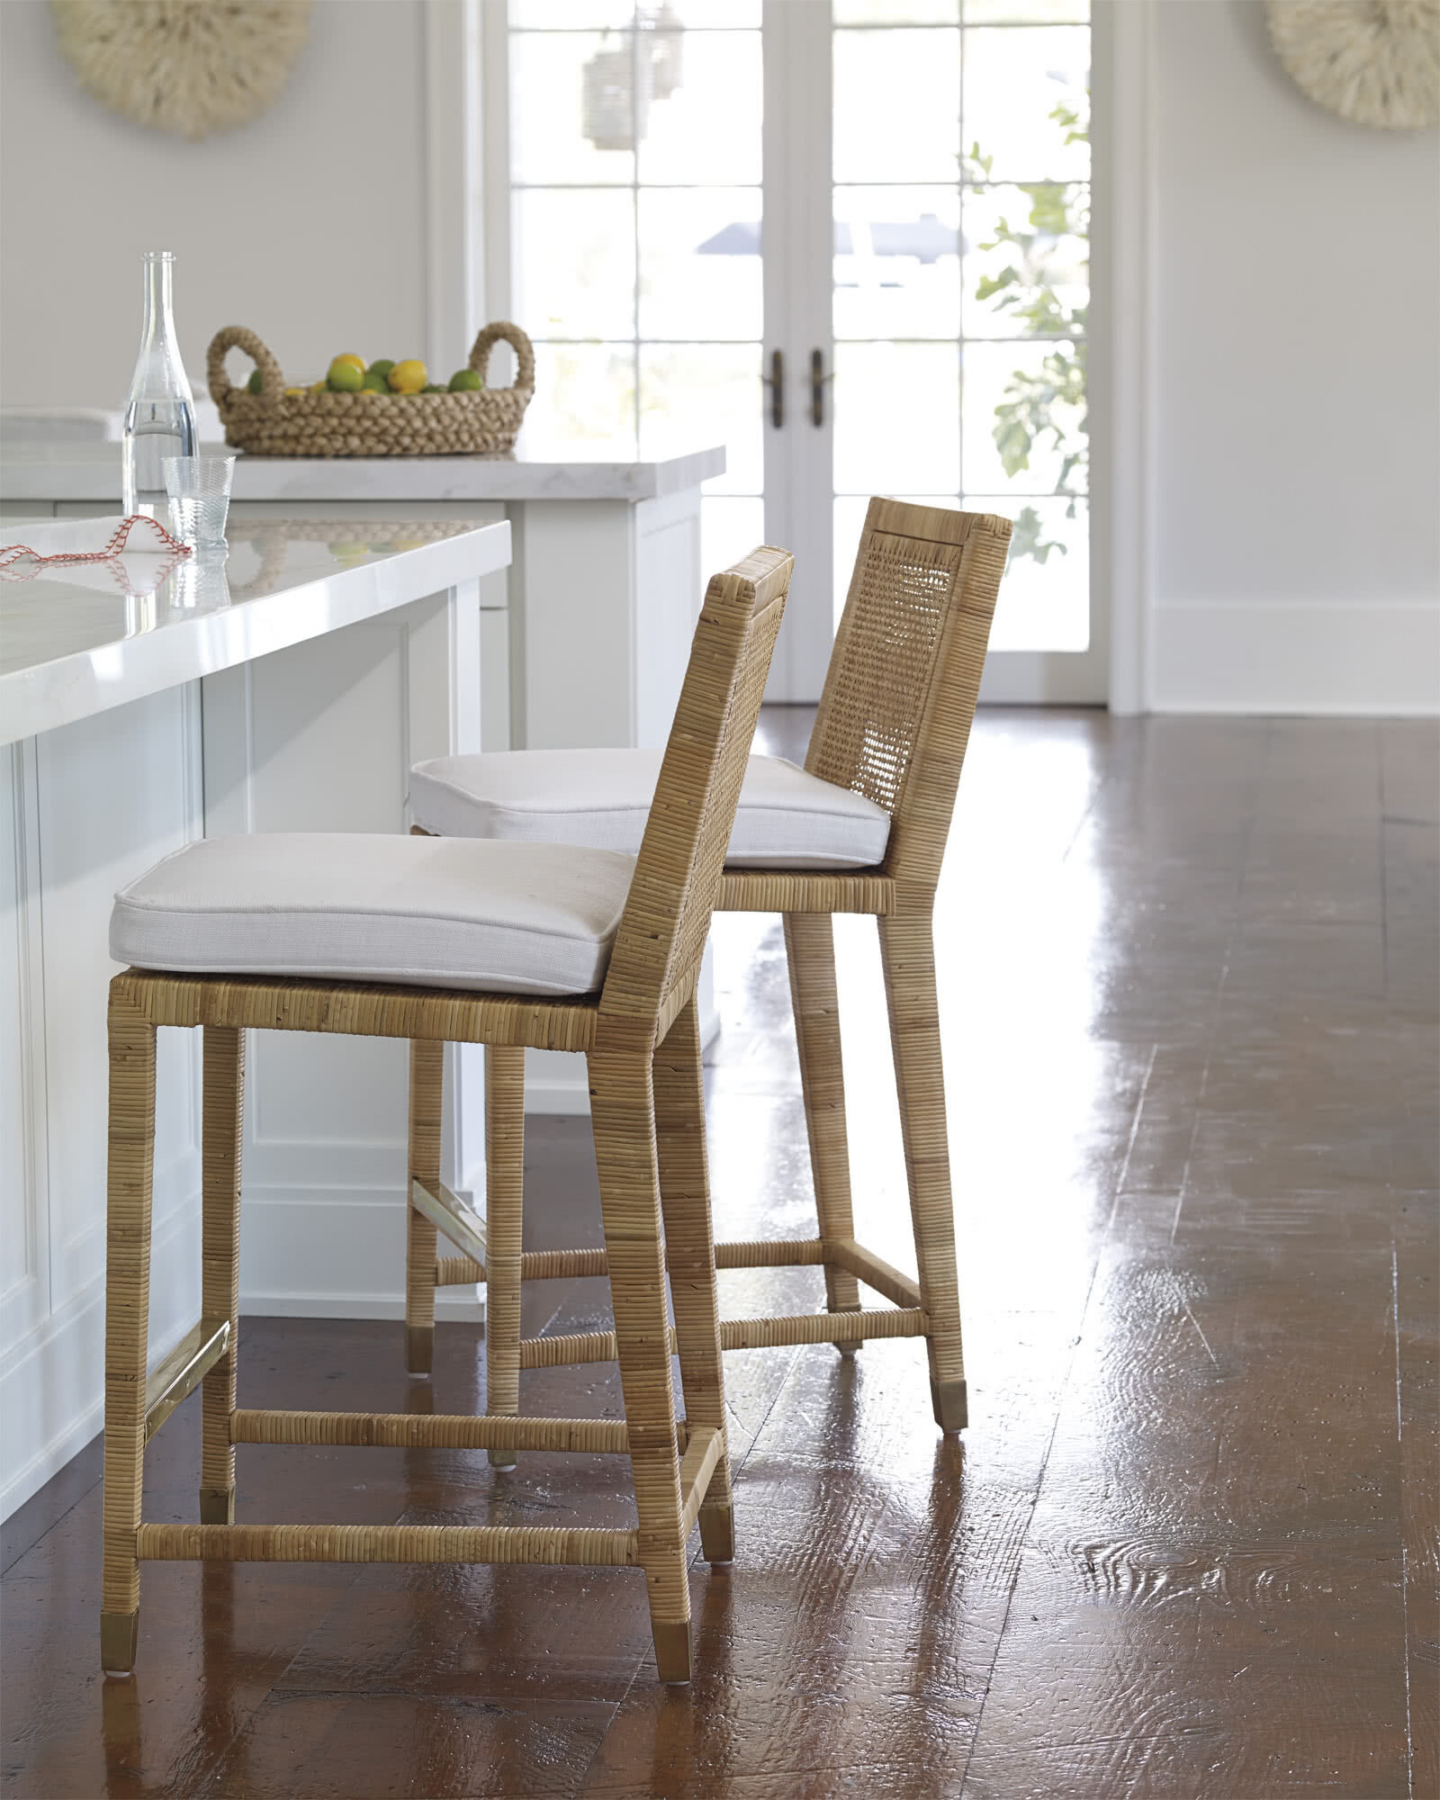 Serena & Lily counter stools add natural warmth and woven texture to a white kitchen. #counterstools #coastalkitchens